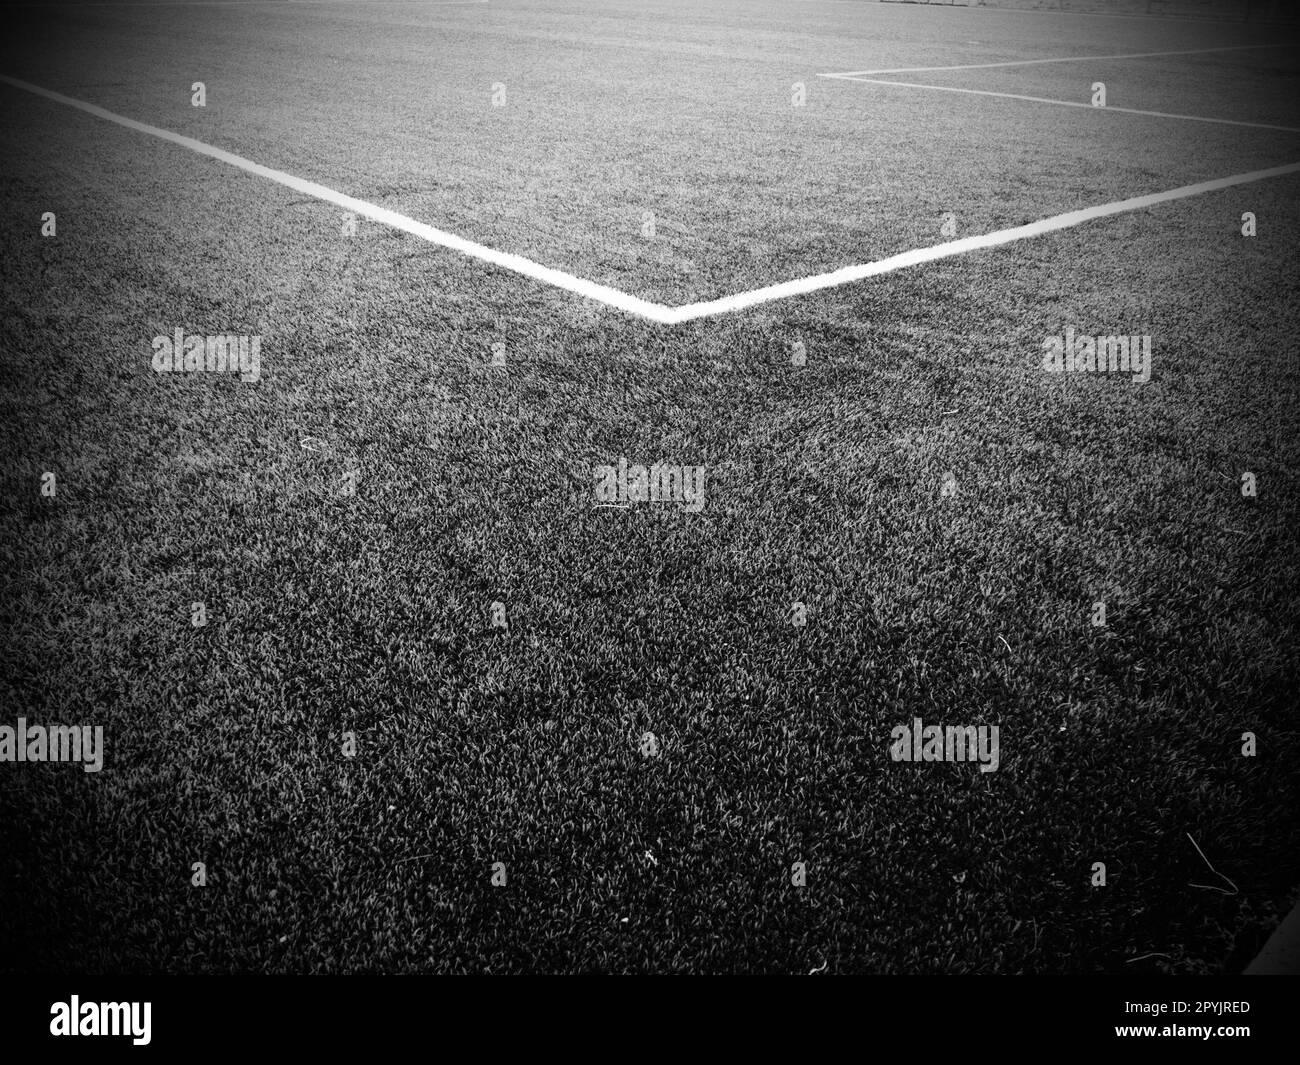 The marking of the football field. White lines no more than 12 cm or 5 inches wide. Football field area. Black and white monochrome photography Stock Photo